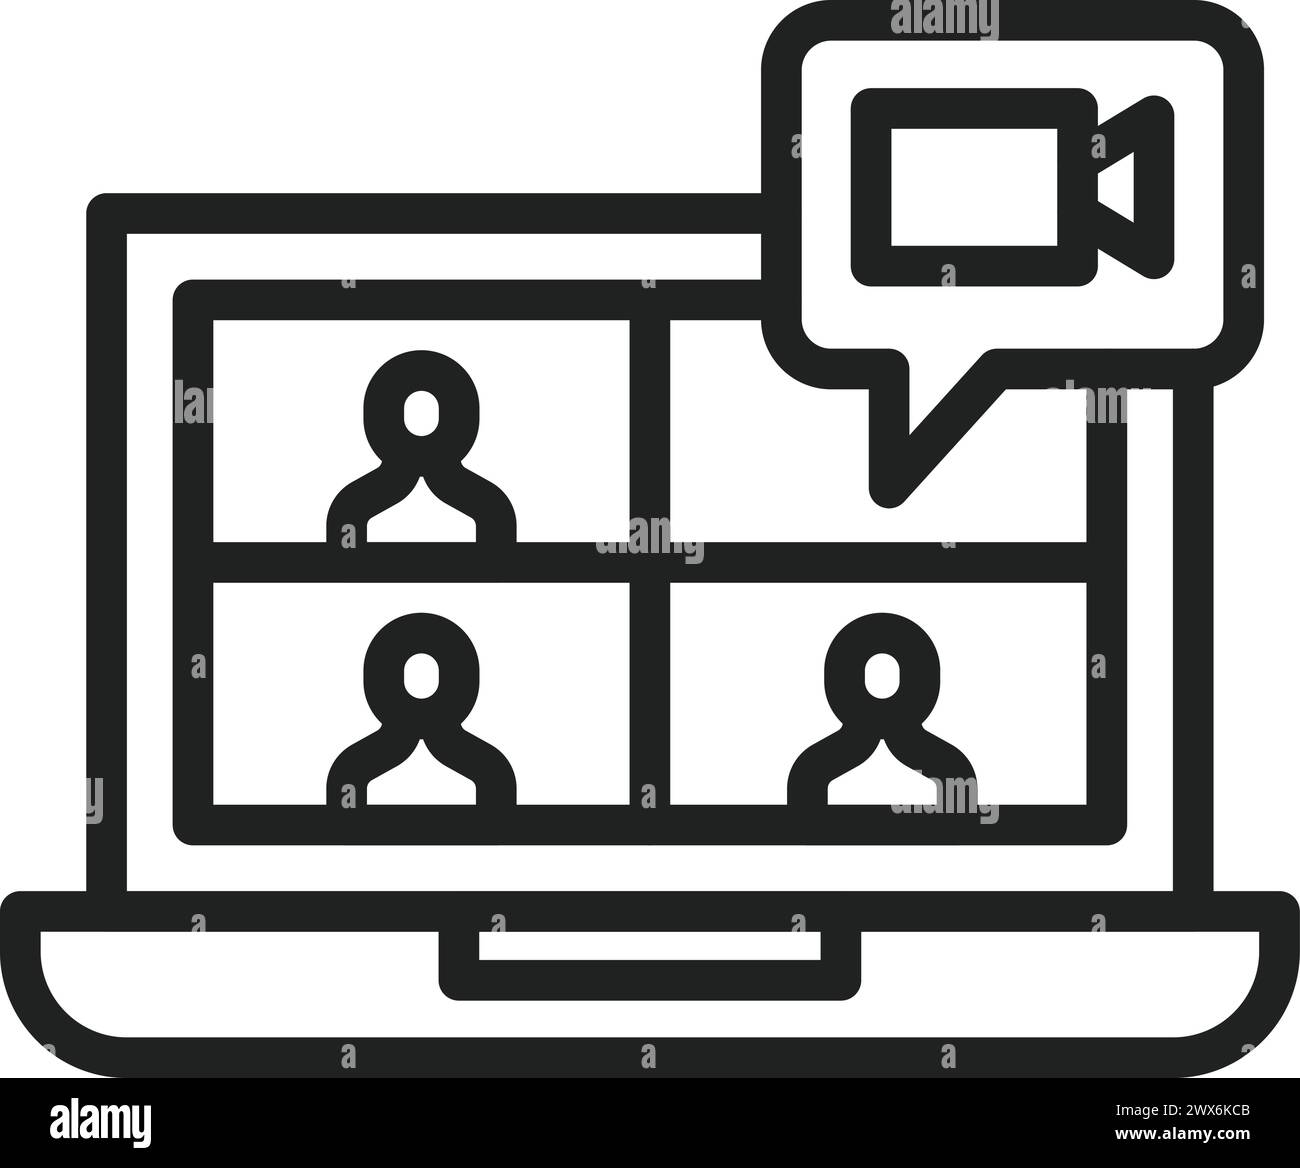 Online Meeting icon vector image. Suitable for mobile application web application and print media. Stock Vector